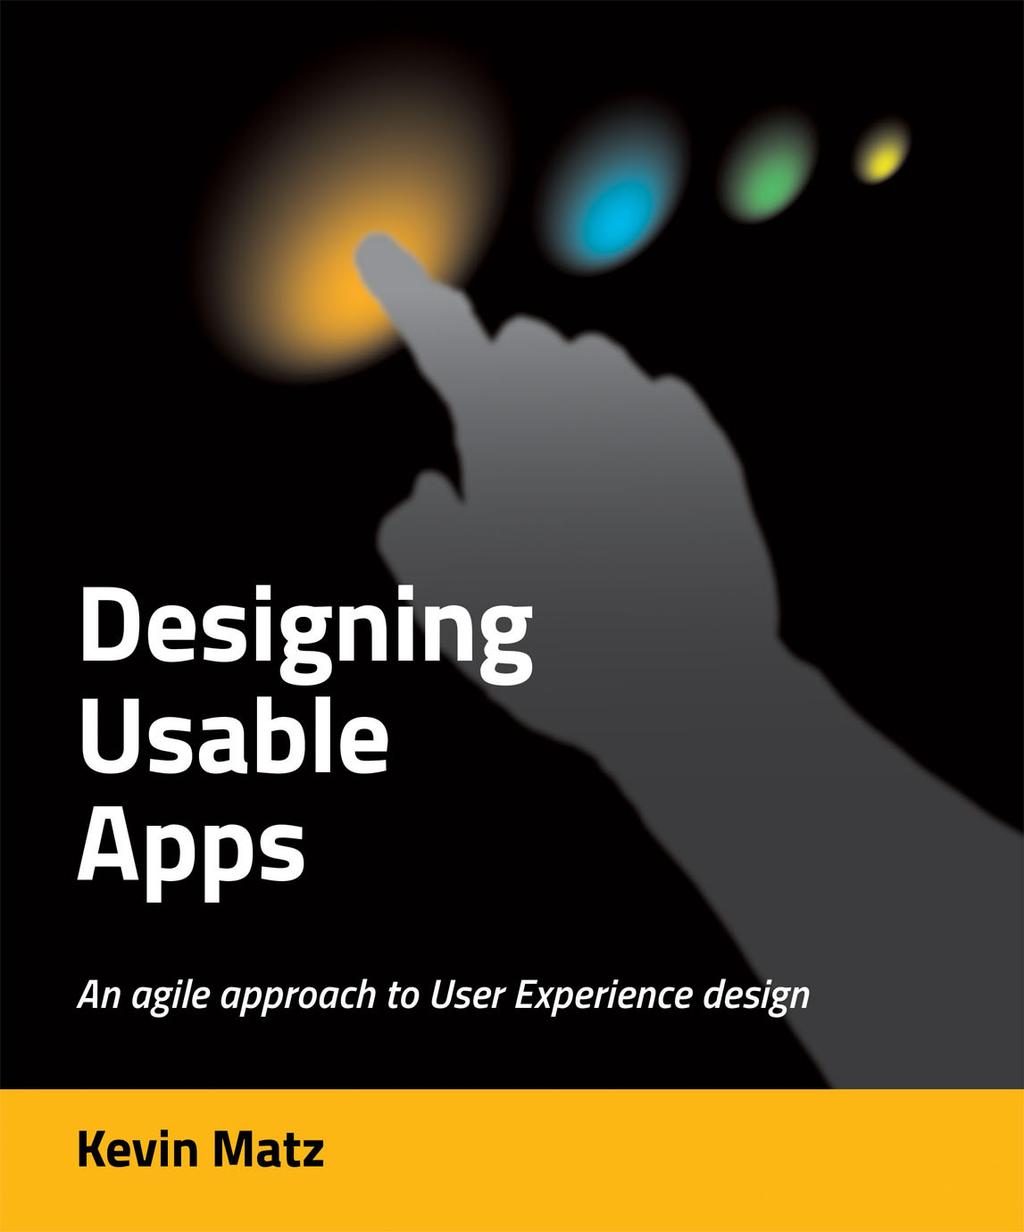 This is a free sample excerpt from the book: Designing Usable Apps An agile approach to User Experience design Author: Kevin Matz 264 pages (softcover edition) Print edition